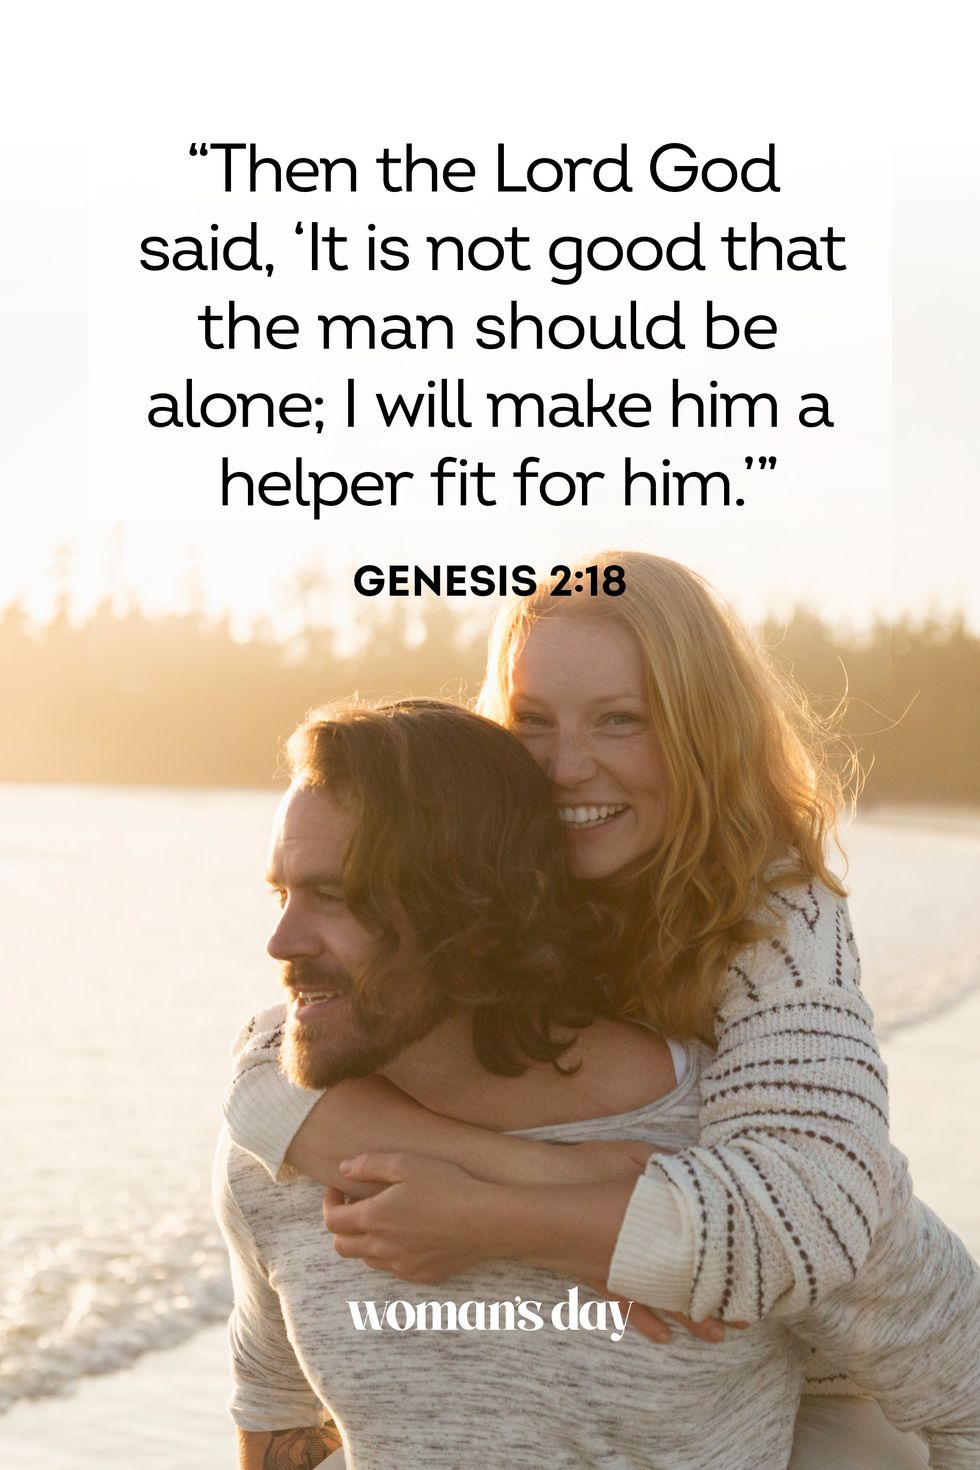 25 Bible Verses About Relationships — Bible Verses About Love And Marriage